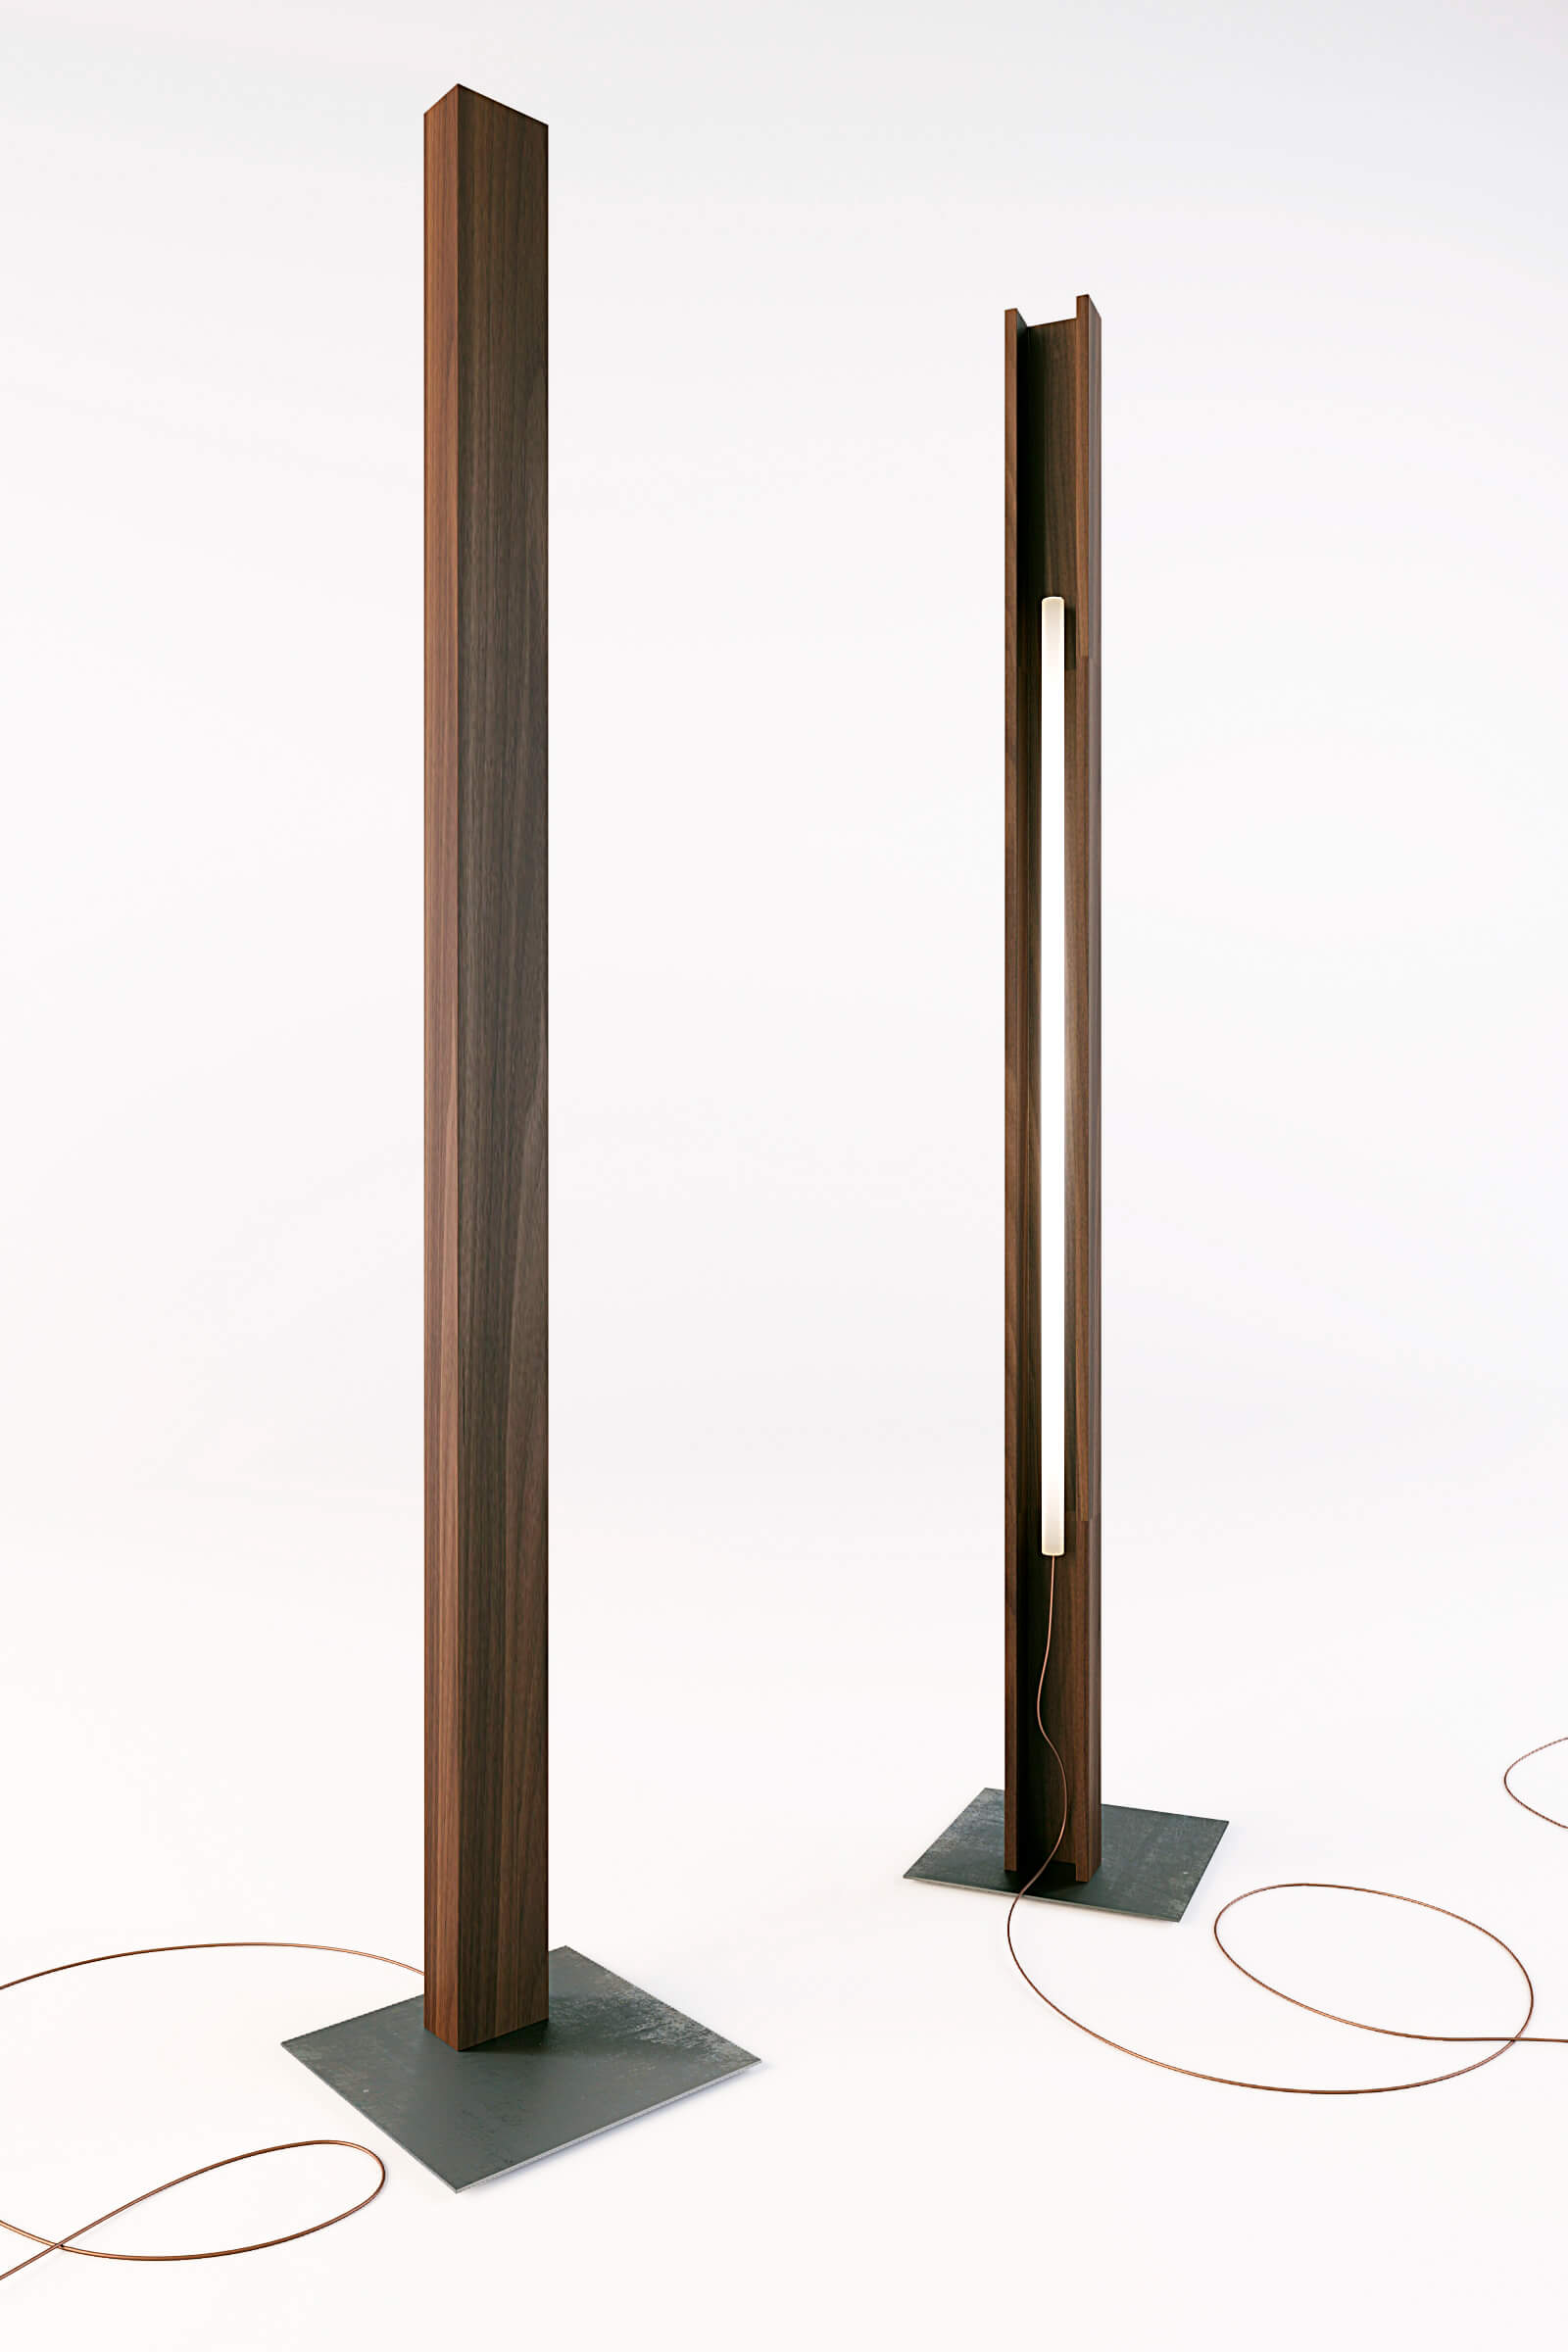 THE TOWER FLOOR LAMP